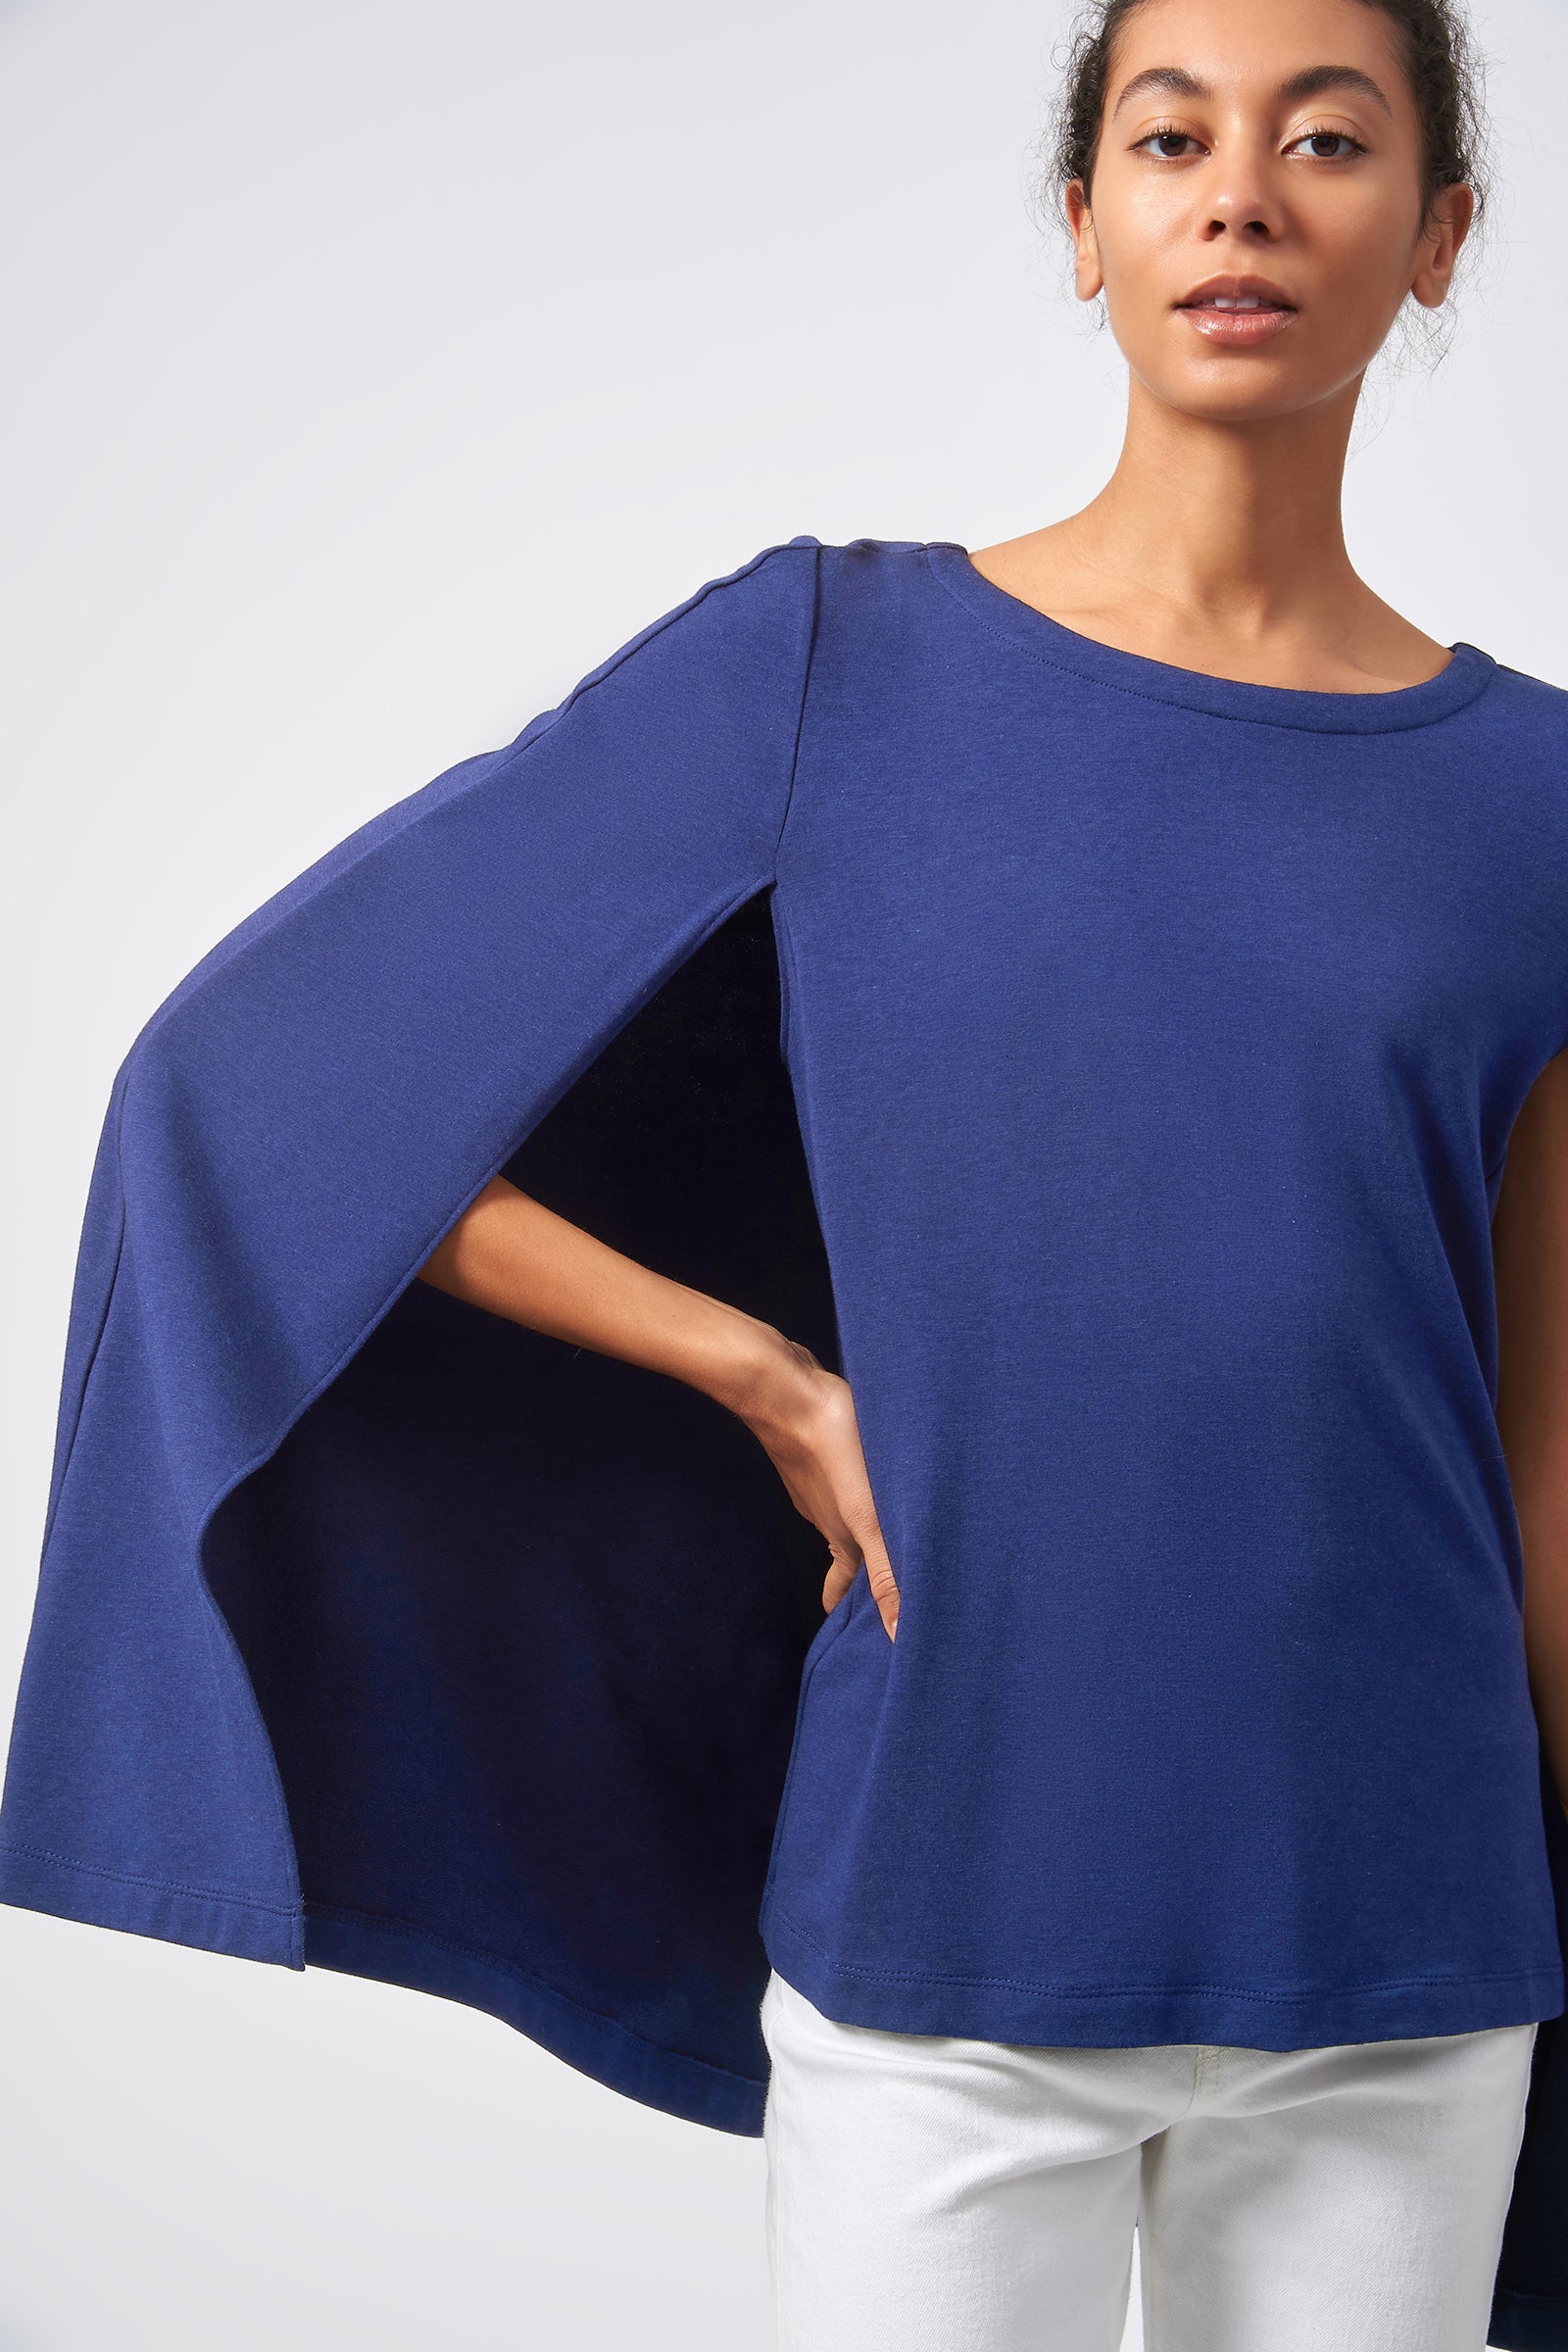 Kal Rieman Cape Sweatshirt in Bamboo Terry Blue image of the alternate front view